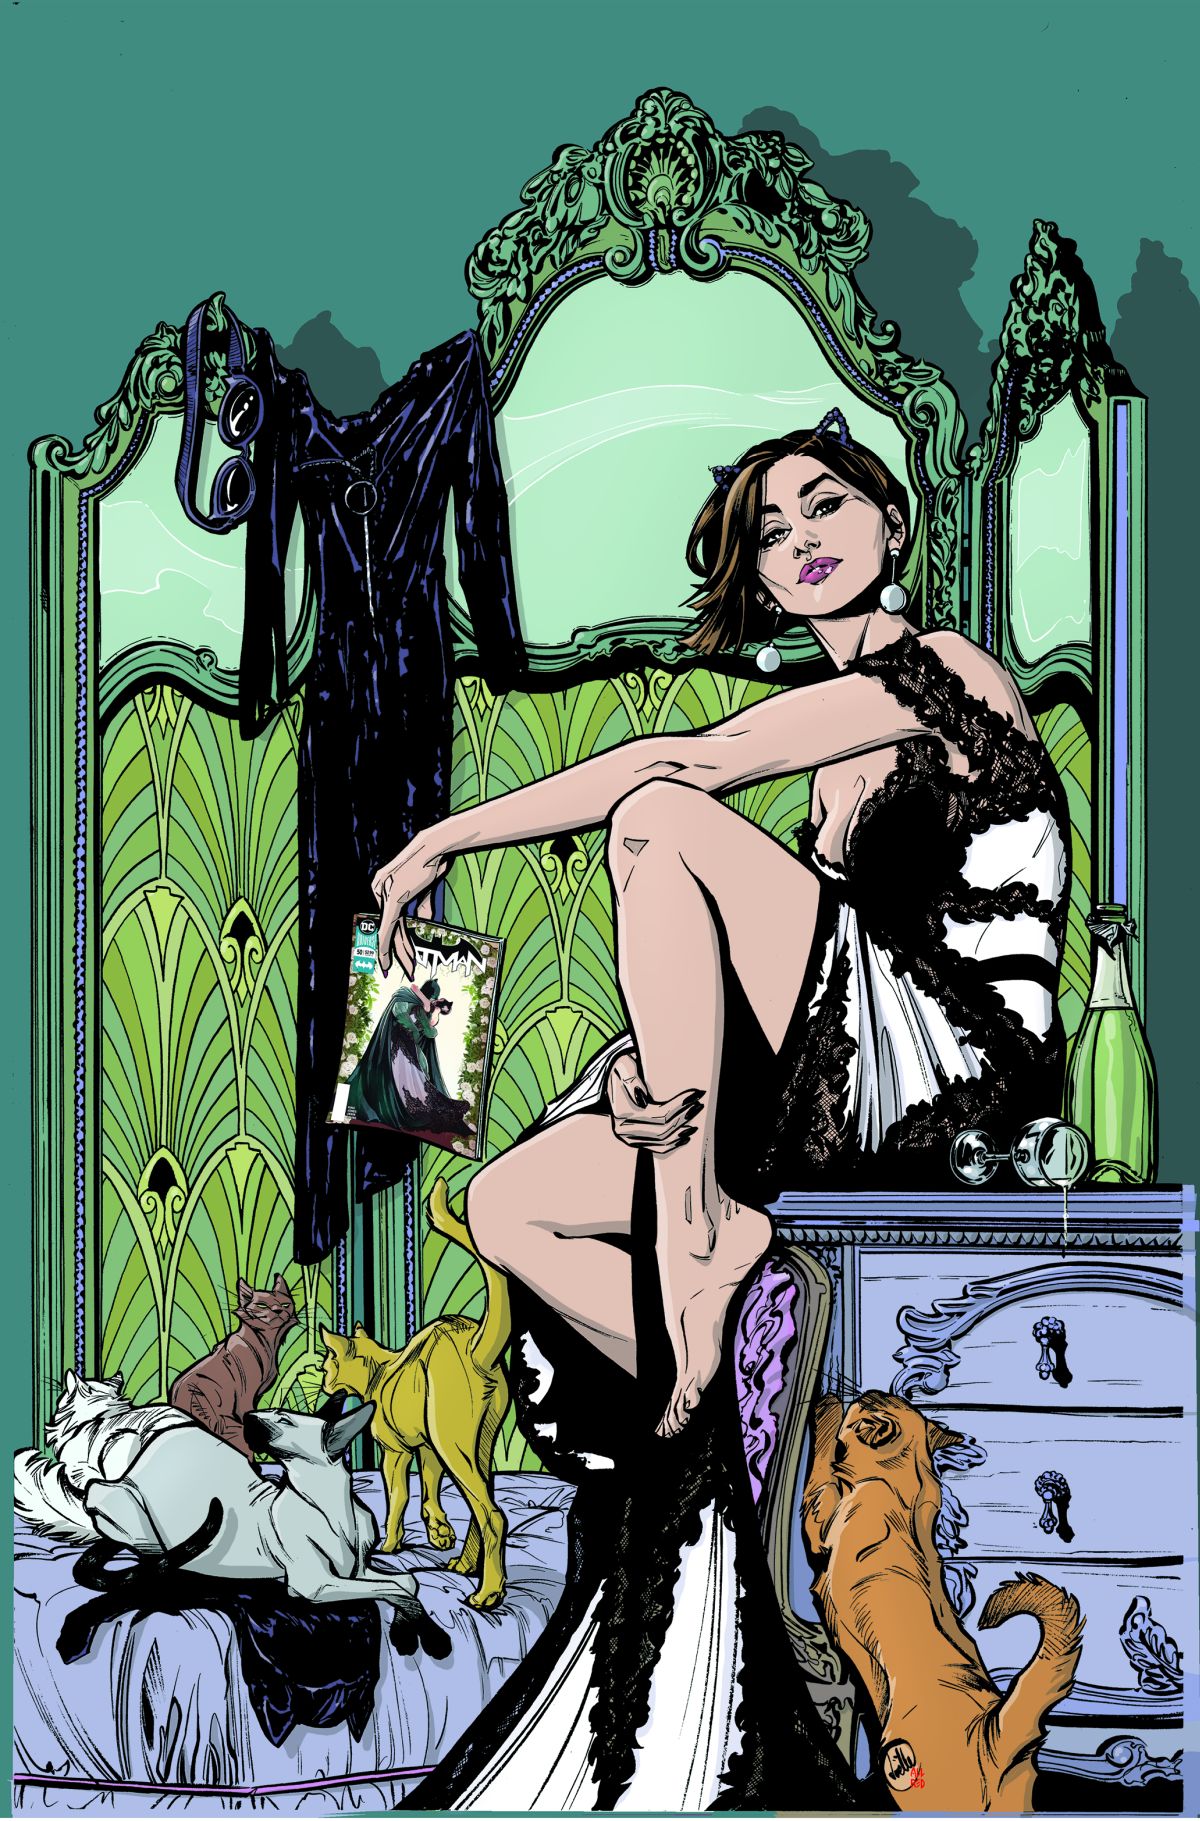 CATWOMAN #1 